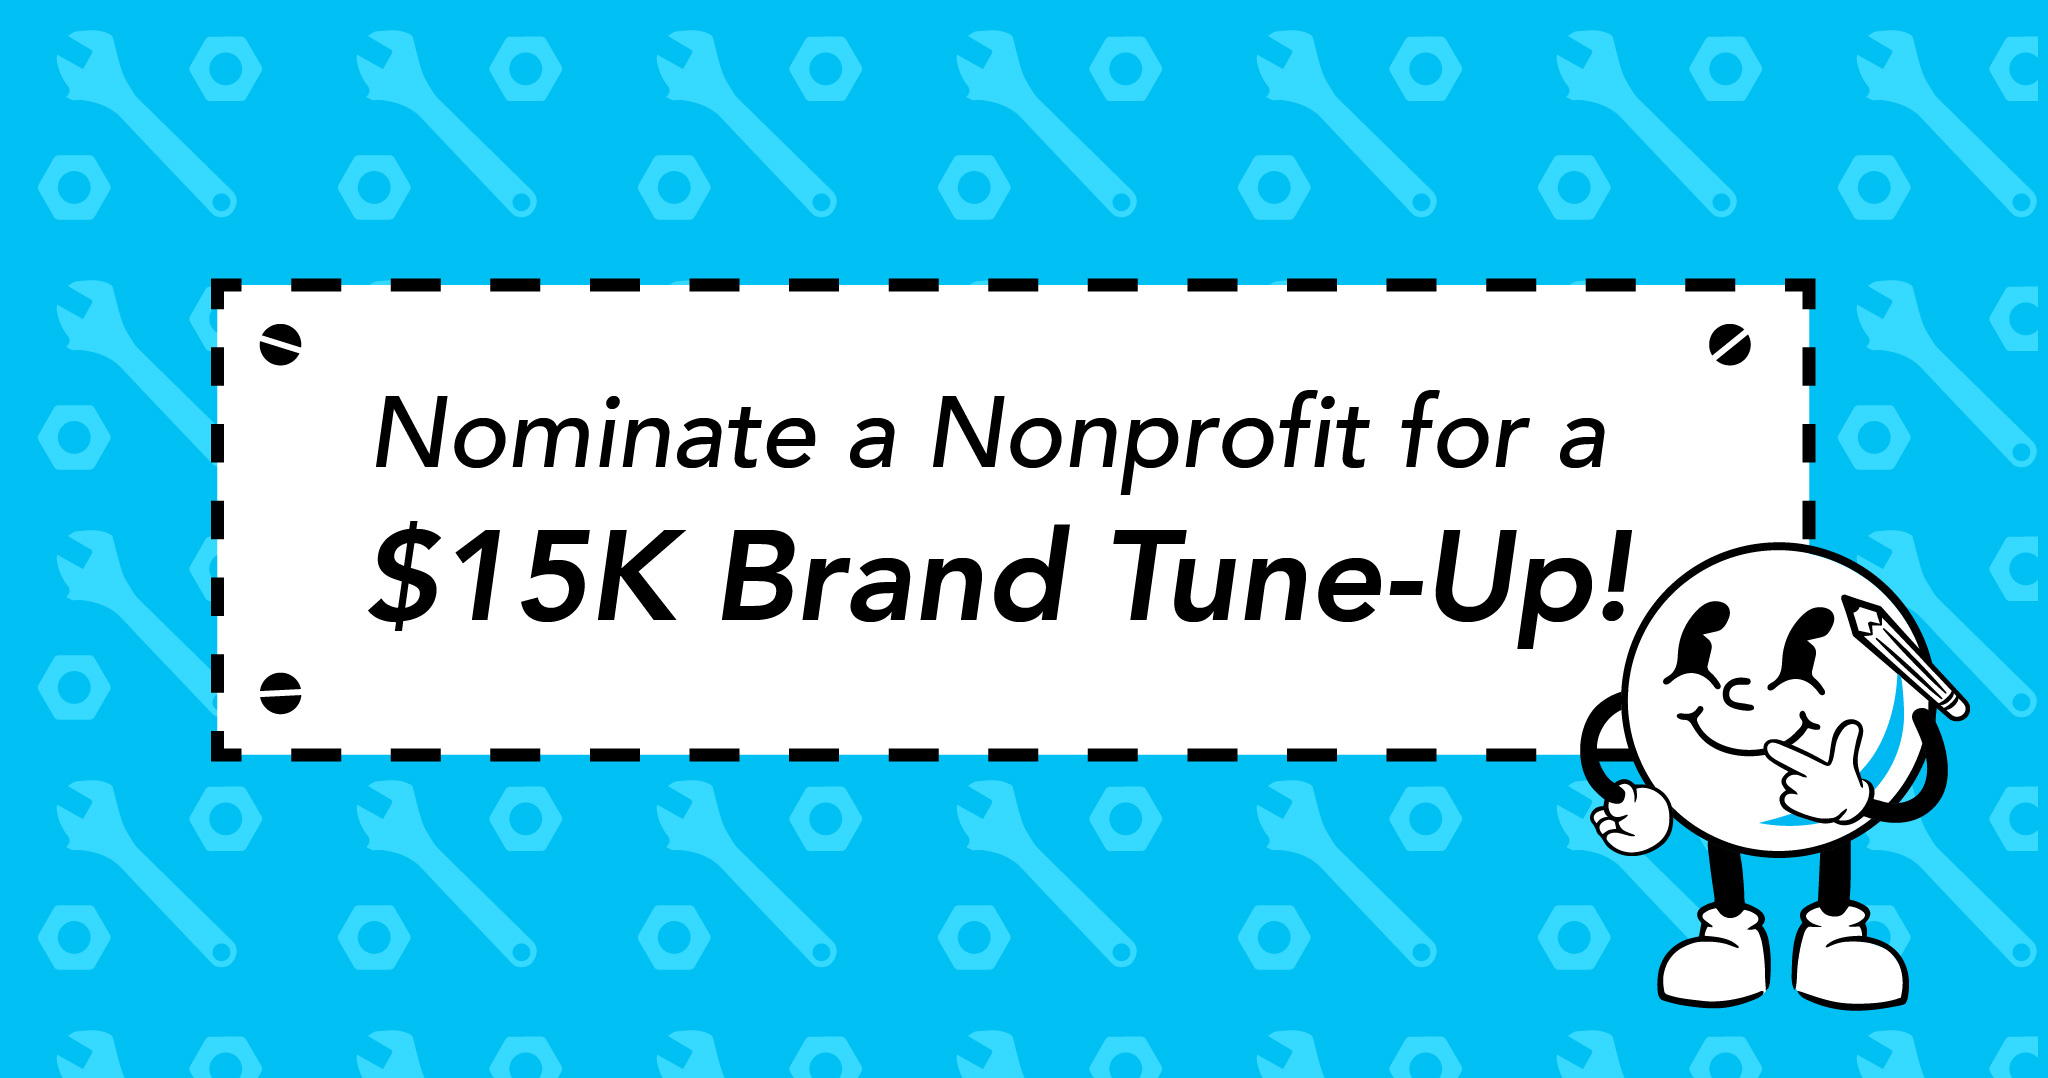 Nominate a nonprofit for a $15K brand tune-up!